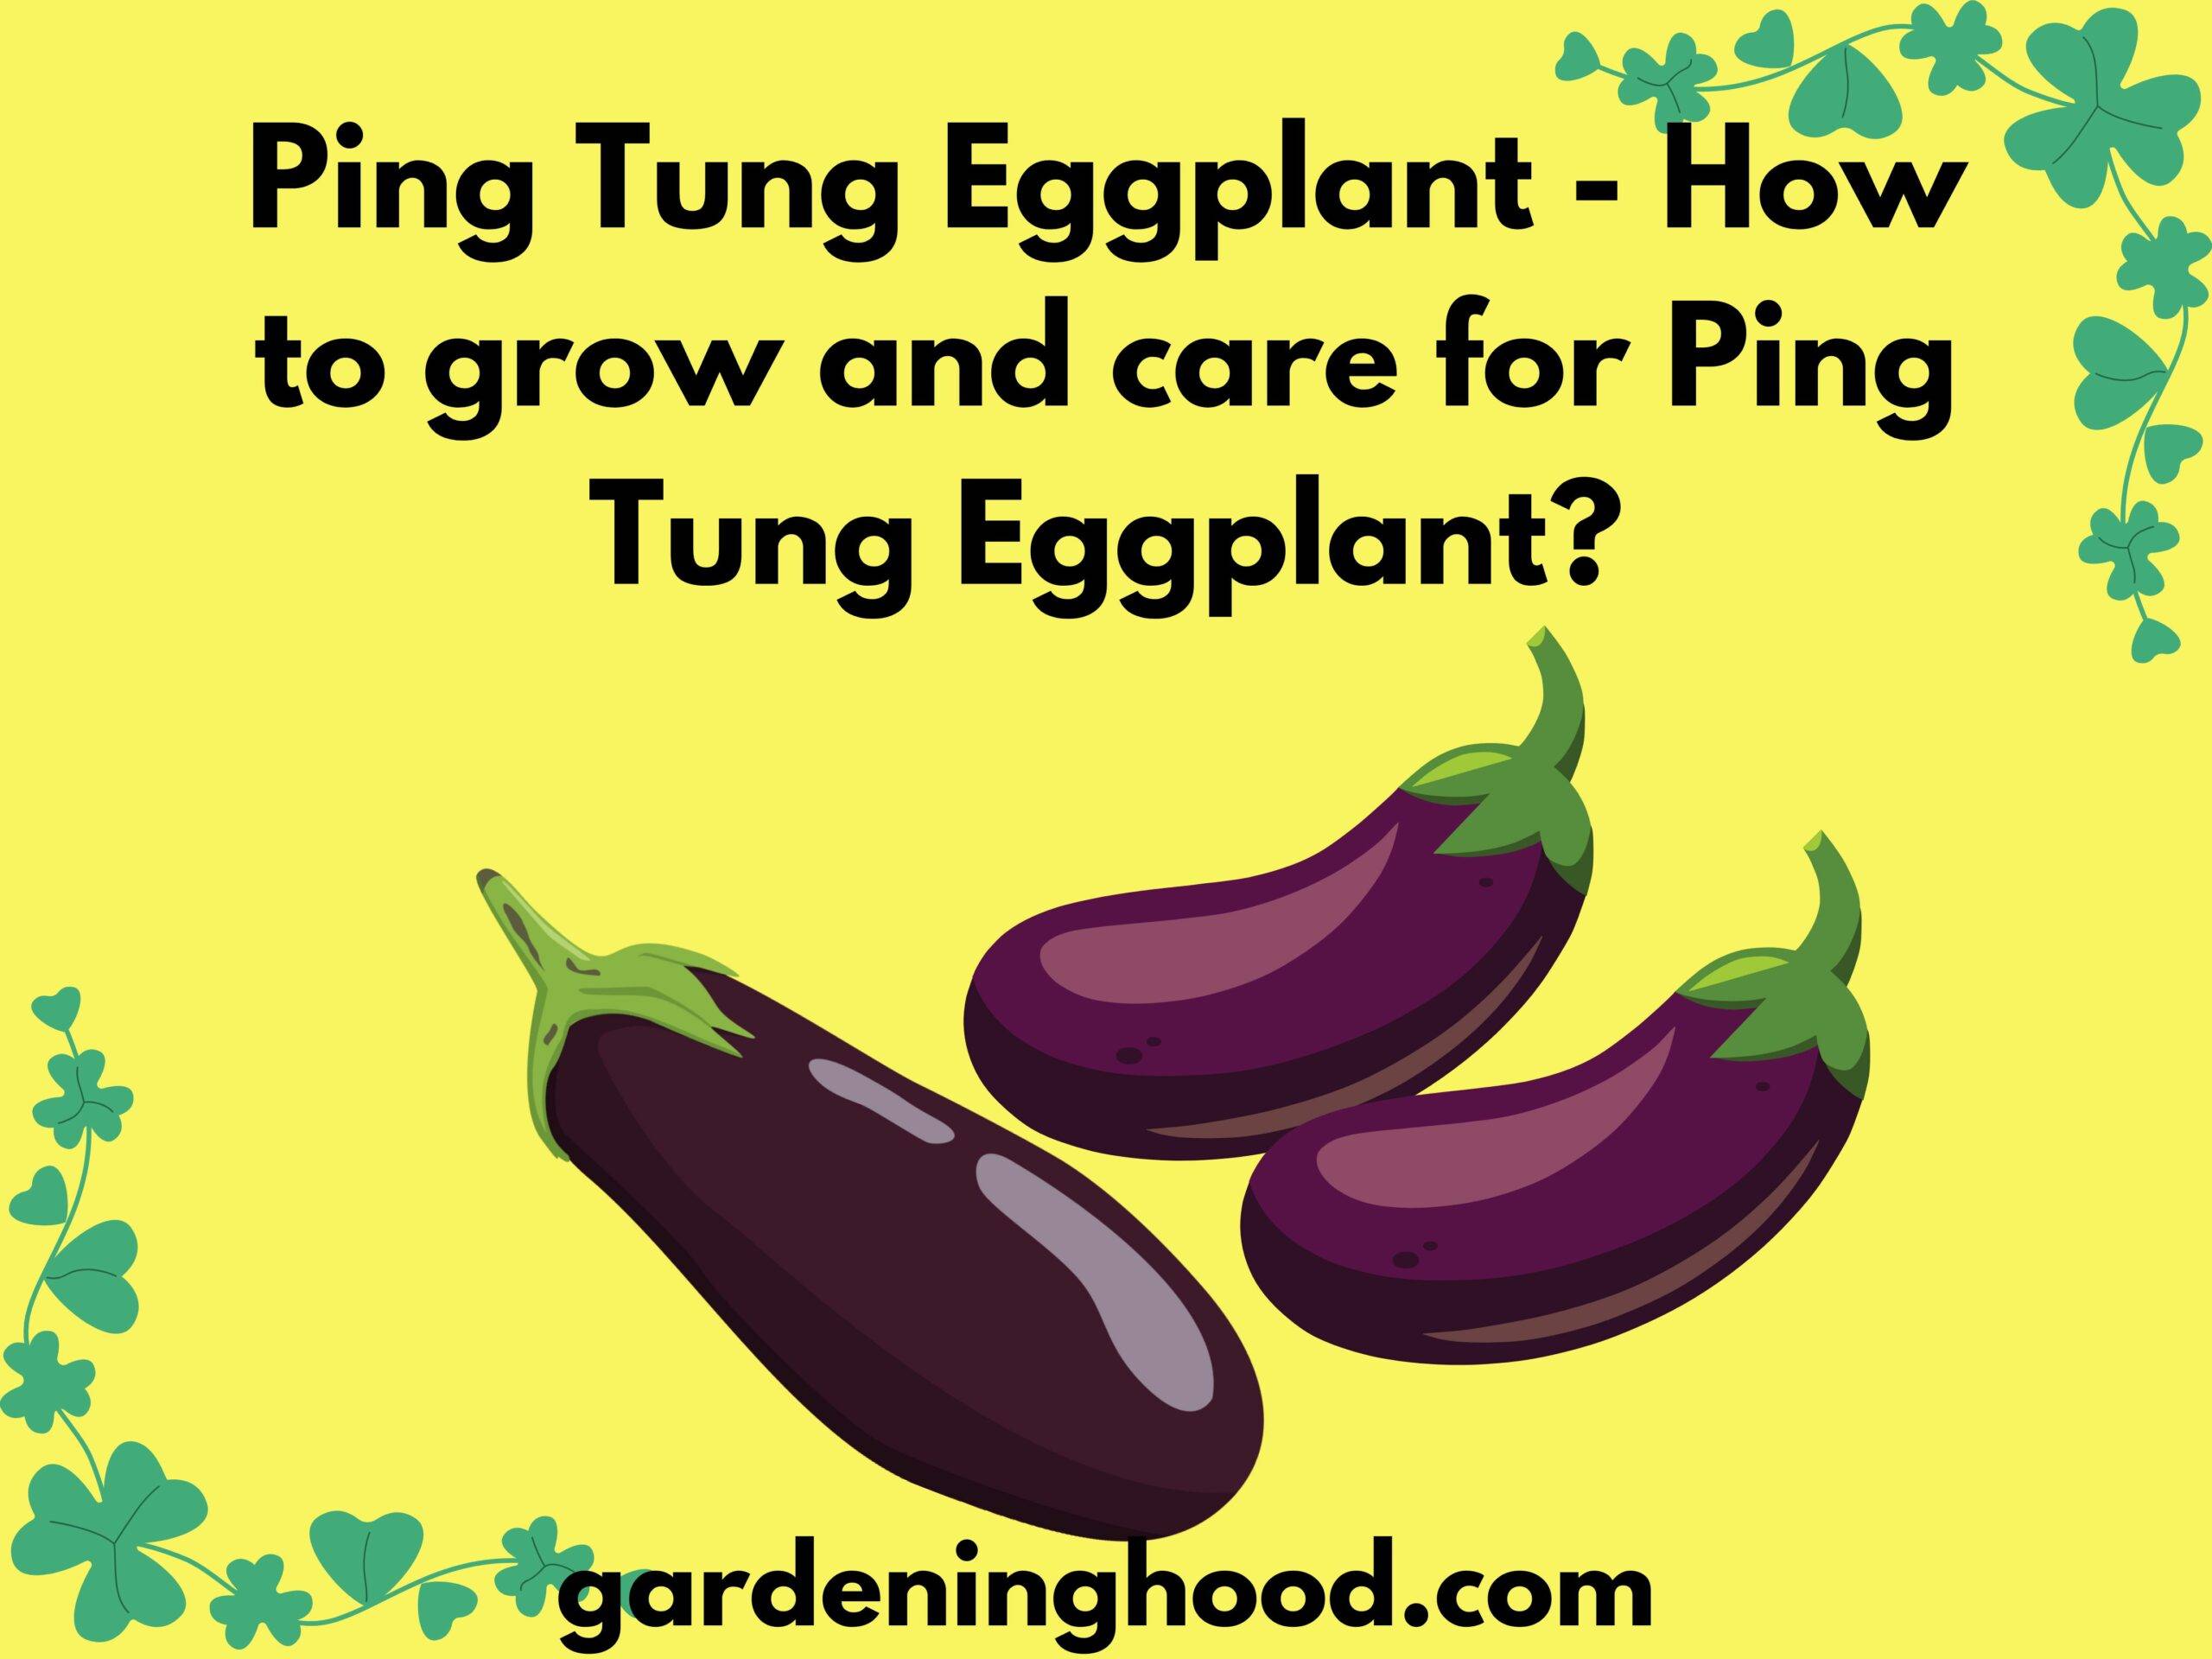 Ping Tung Eggplant - How to grow and care for Ping Tung Eggplant?